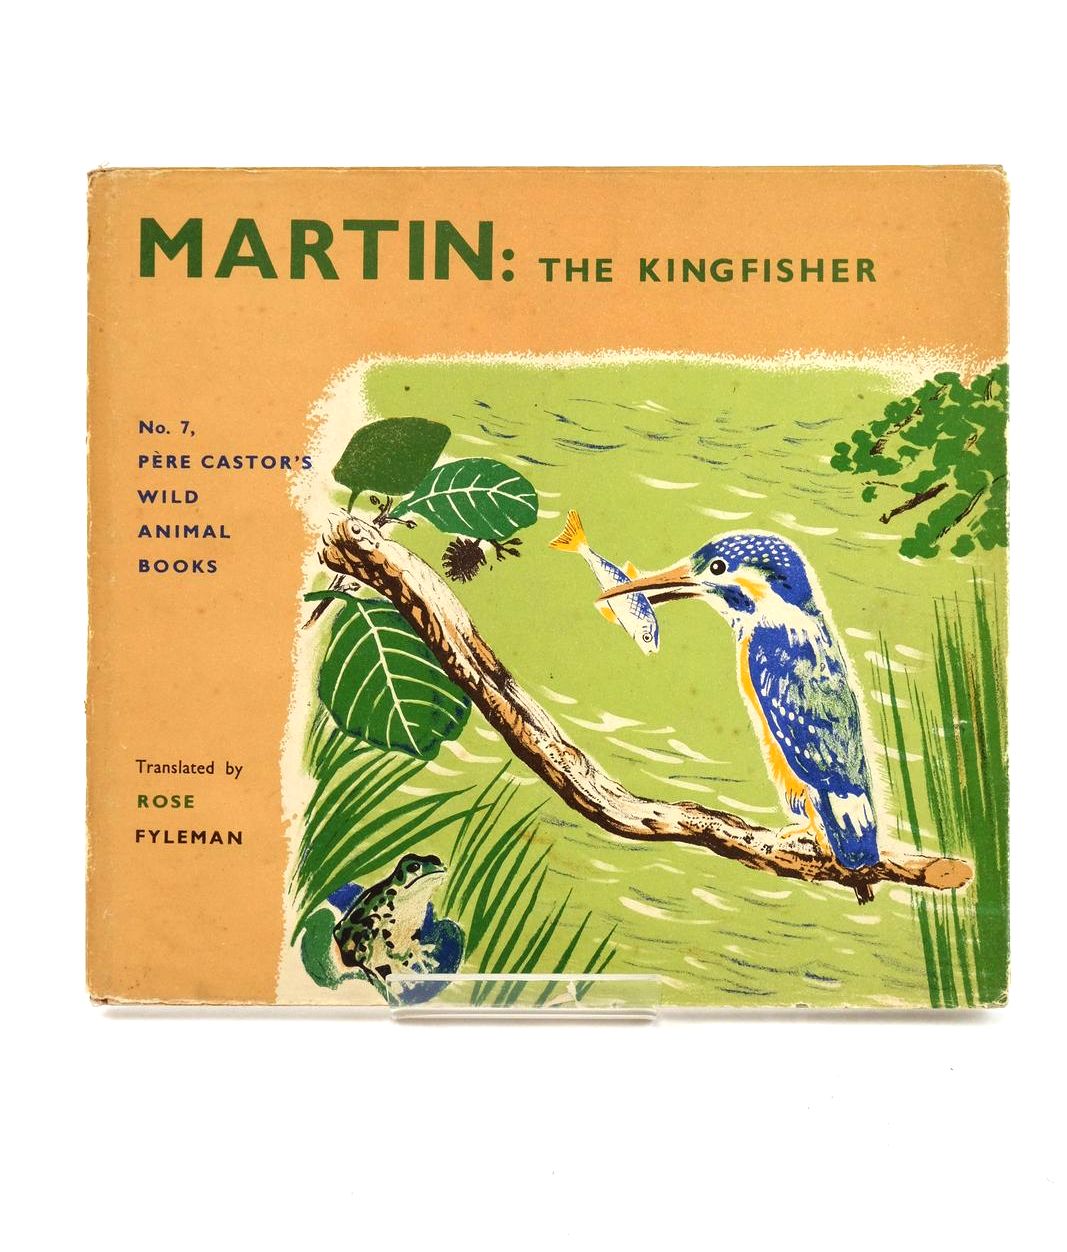 Photo of MARTIN THE KINGFISHER written by Lida,  Fyleman, Rose illustrated by Rojan,  published by George Allen &amp; Unwin Ltd. (STOCK CODE: 1324303)  for sale by Stella & Rose's Books